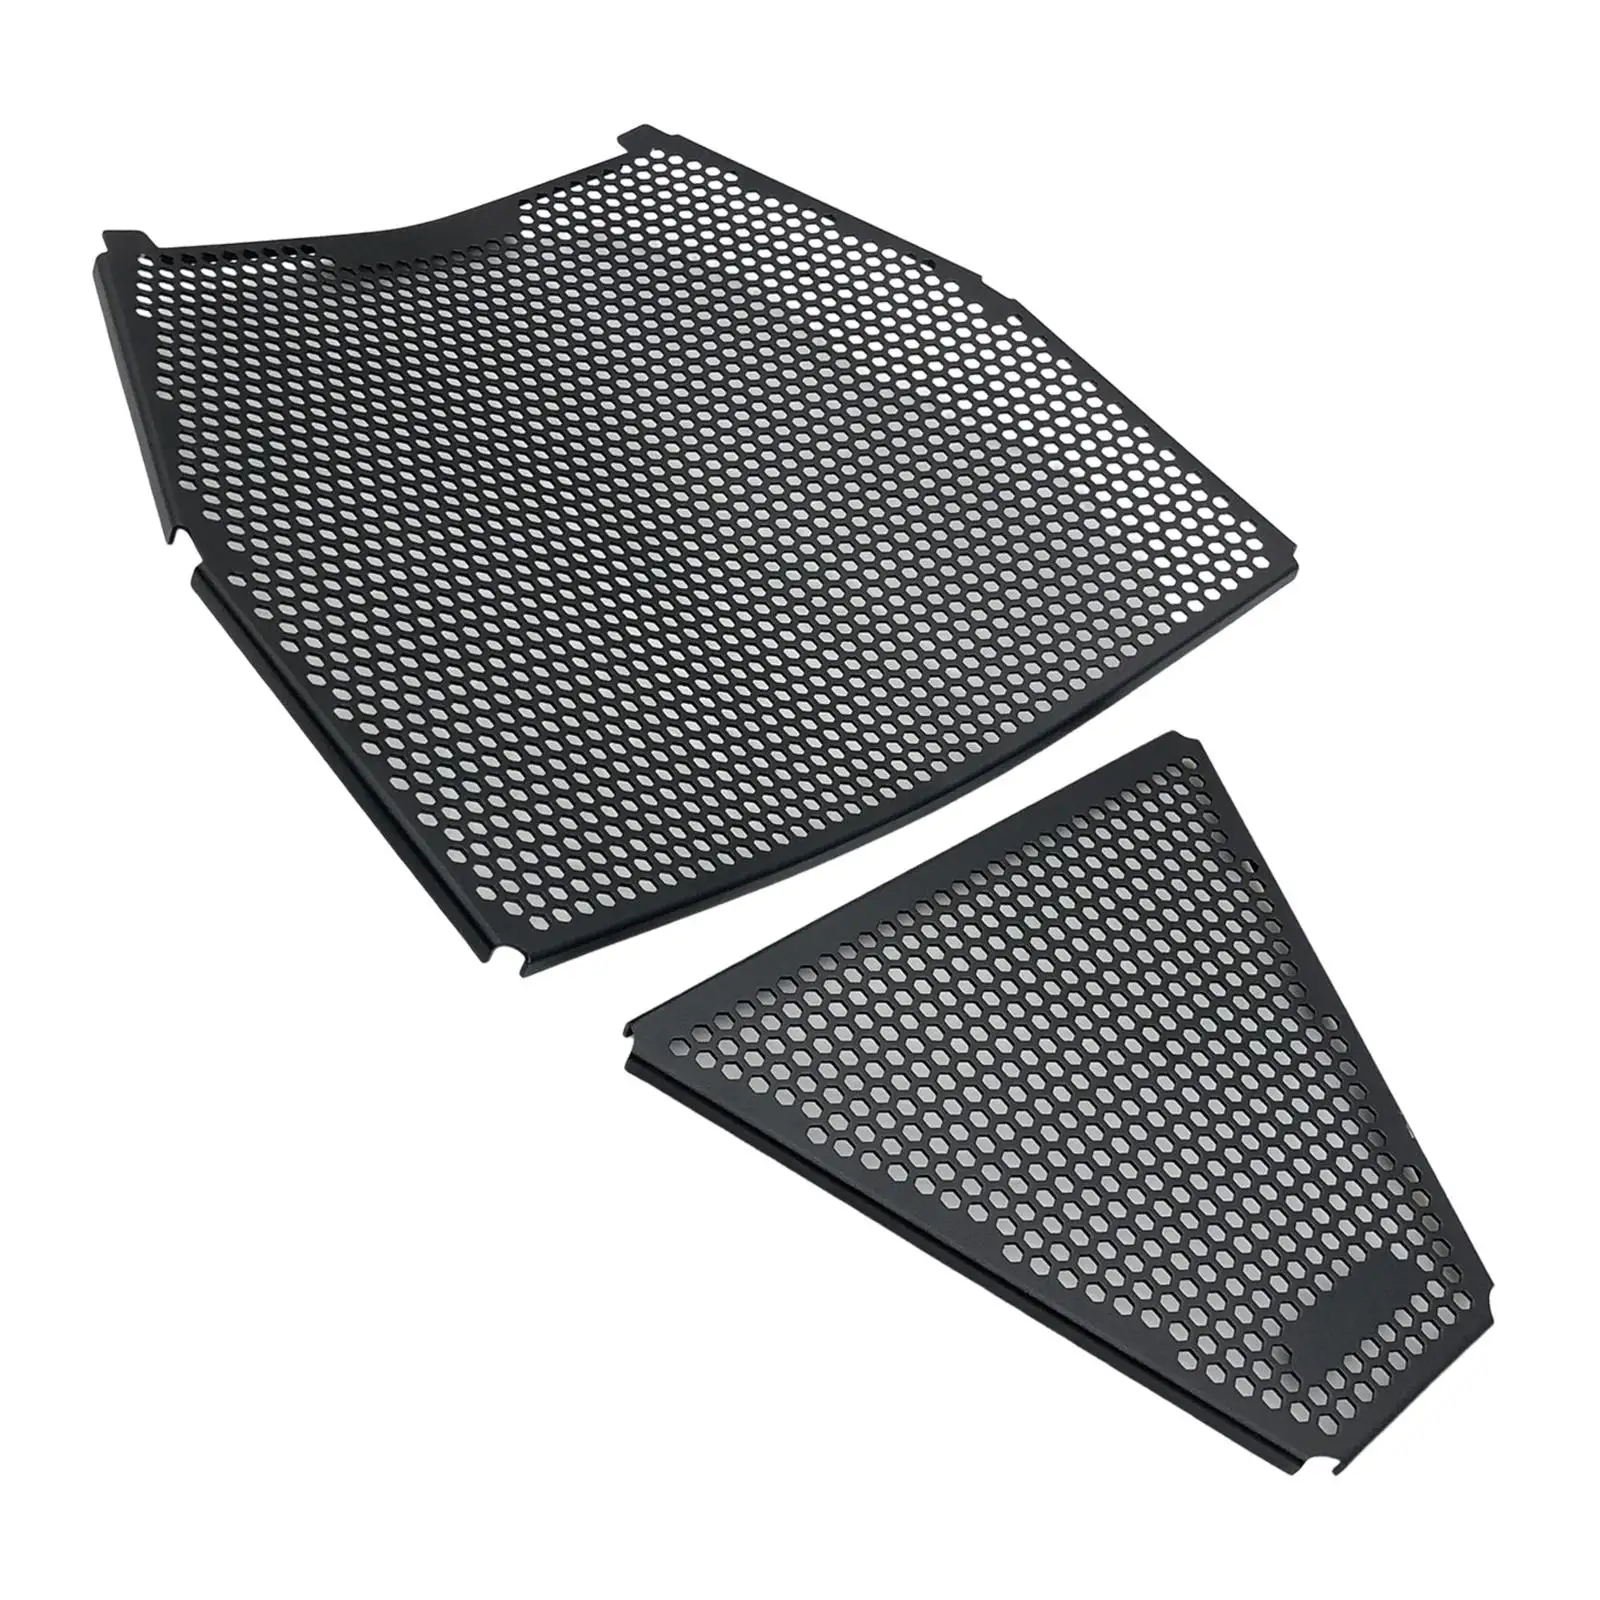 Motorcycle Radiator Grille Easy to Install Premium Protector Cover Replaces Spare Parts for Ducati Panigle V4 2018-2020